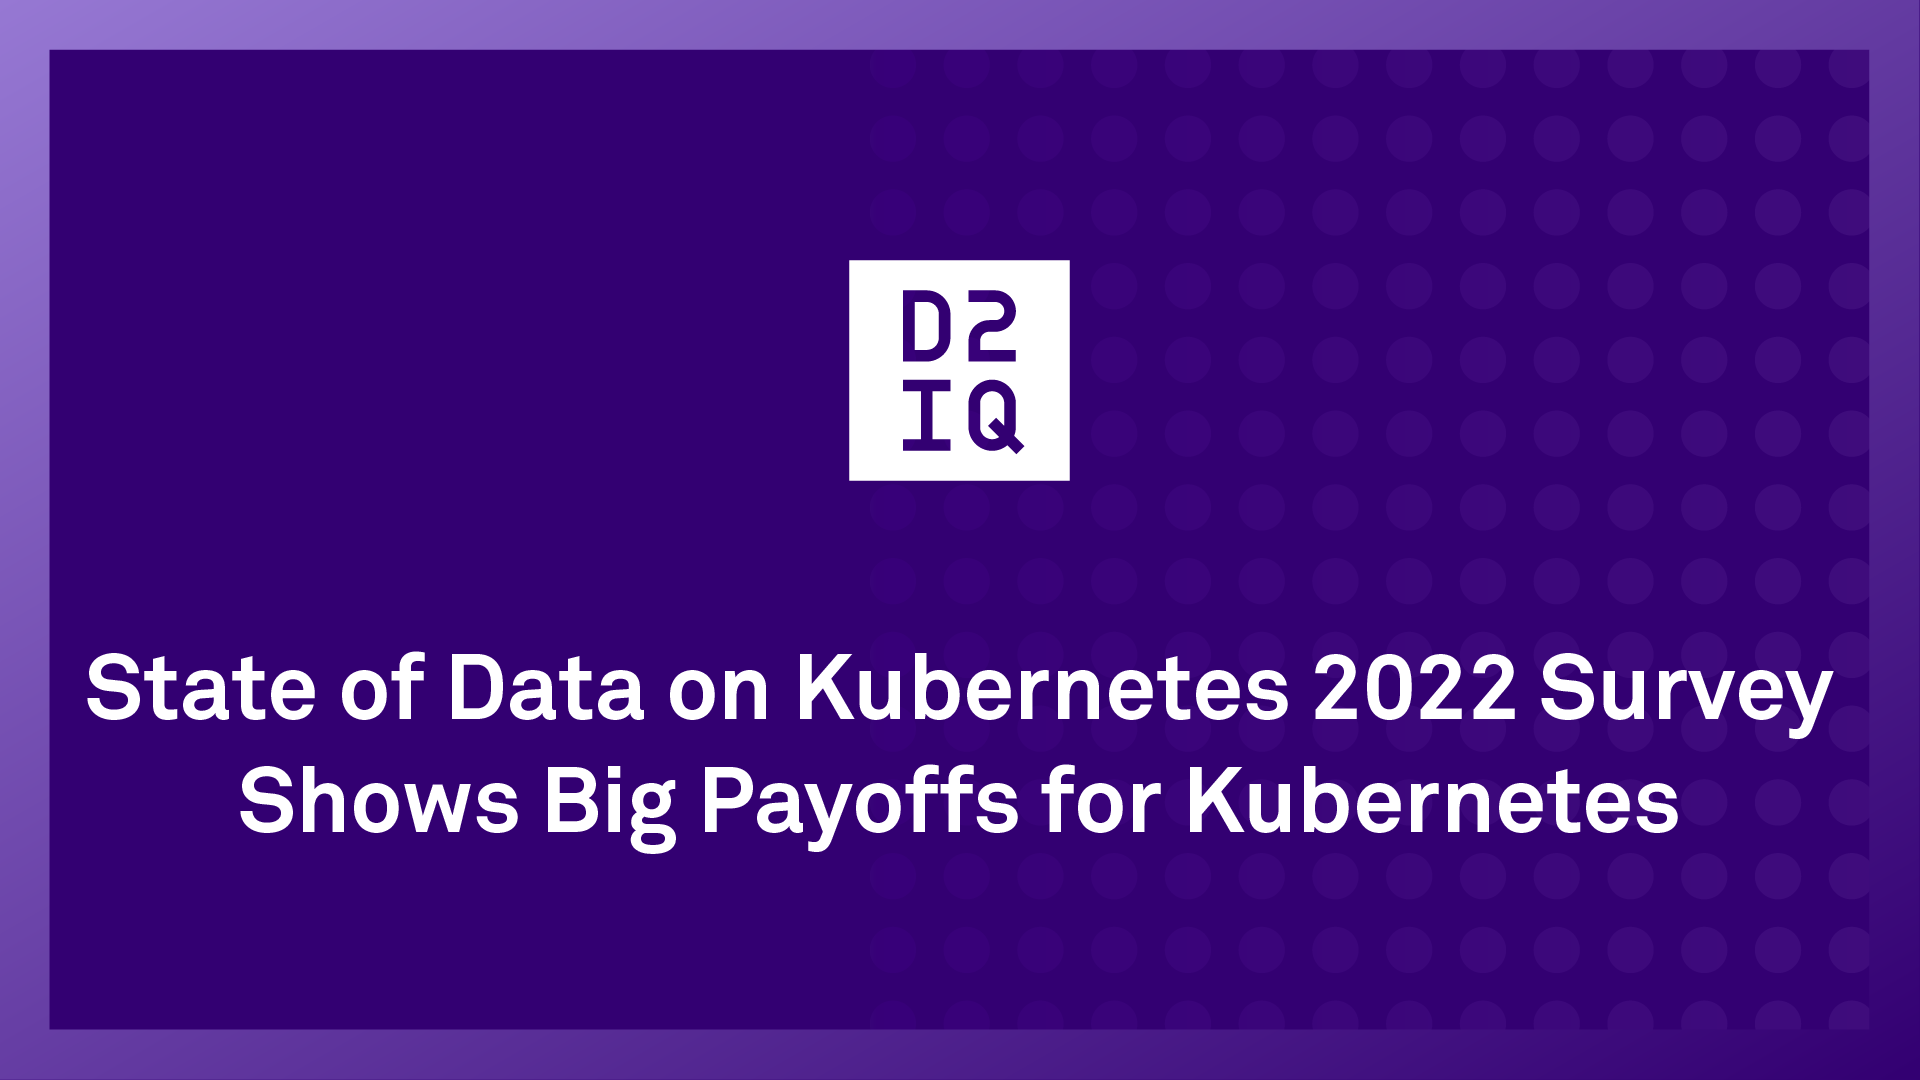 State of Data on Kubernetes 2022 Survey Shows Big Payoffs for Kubernetes